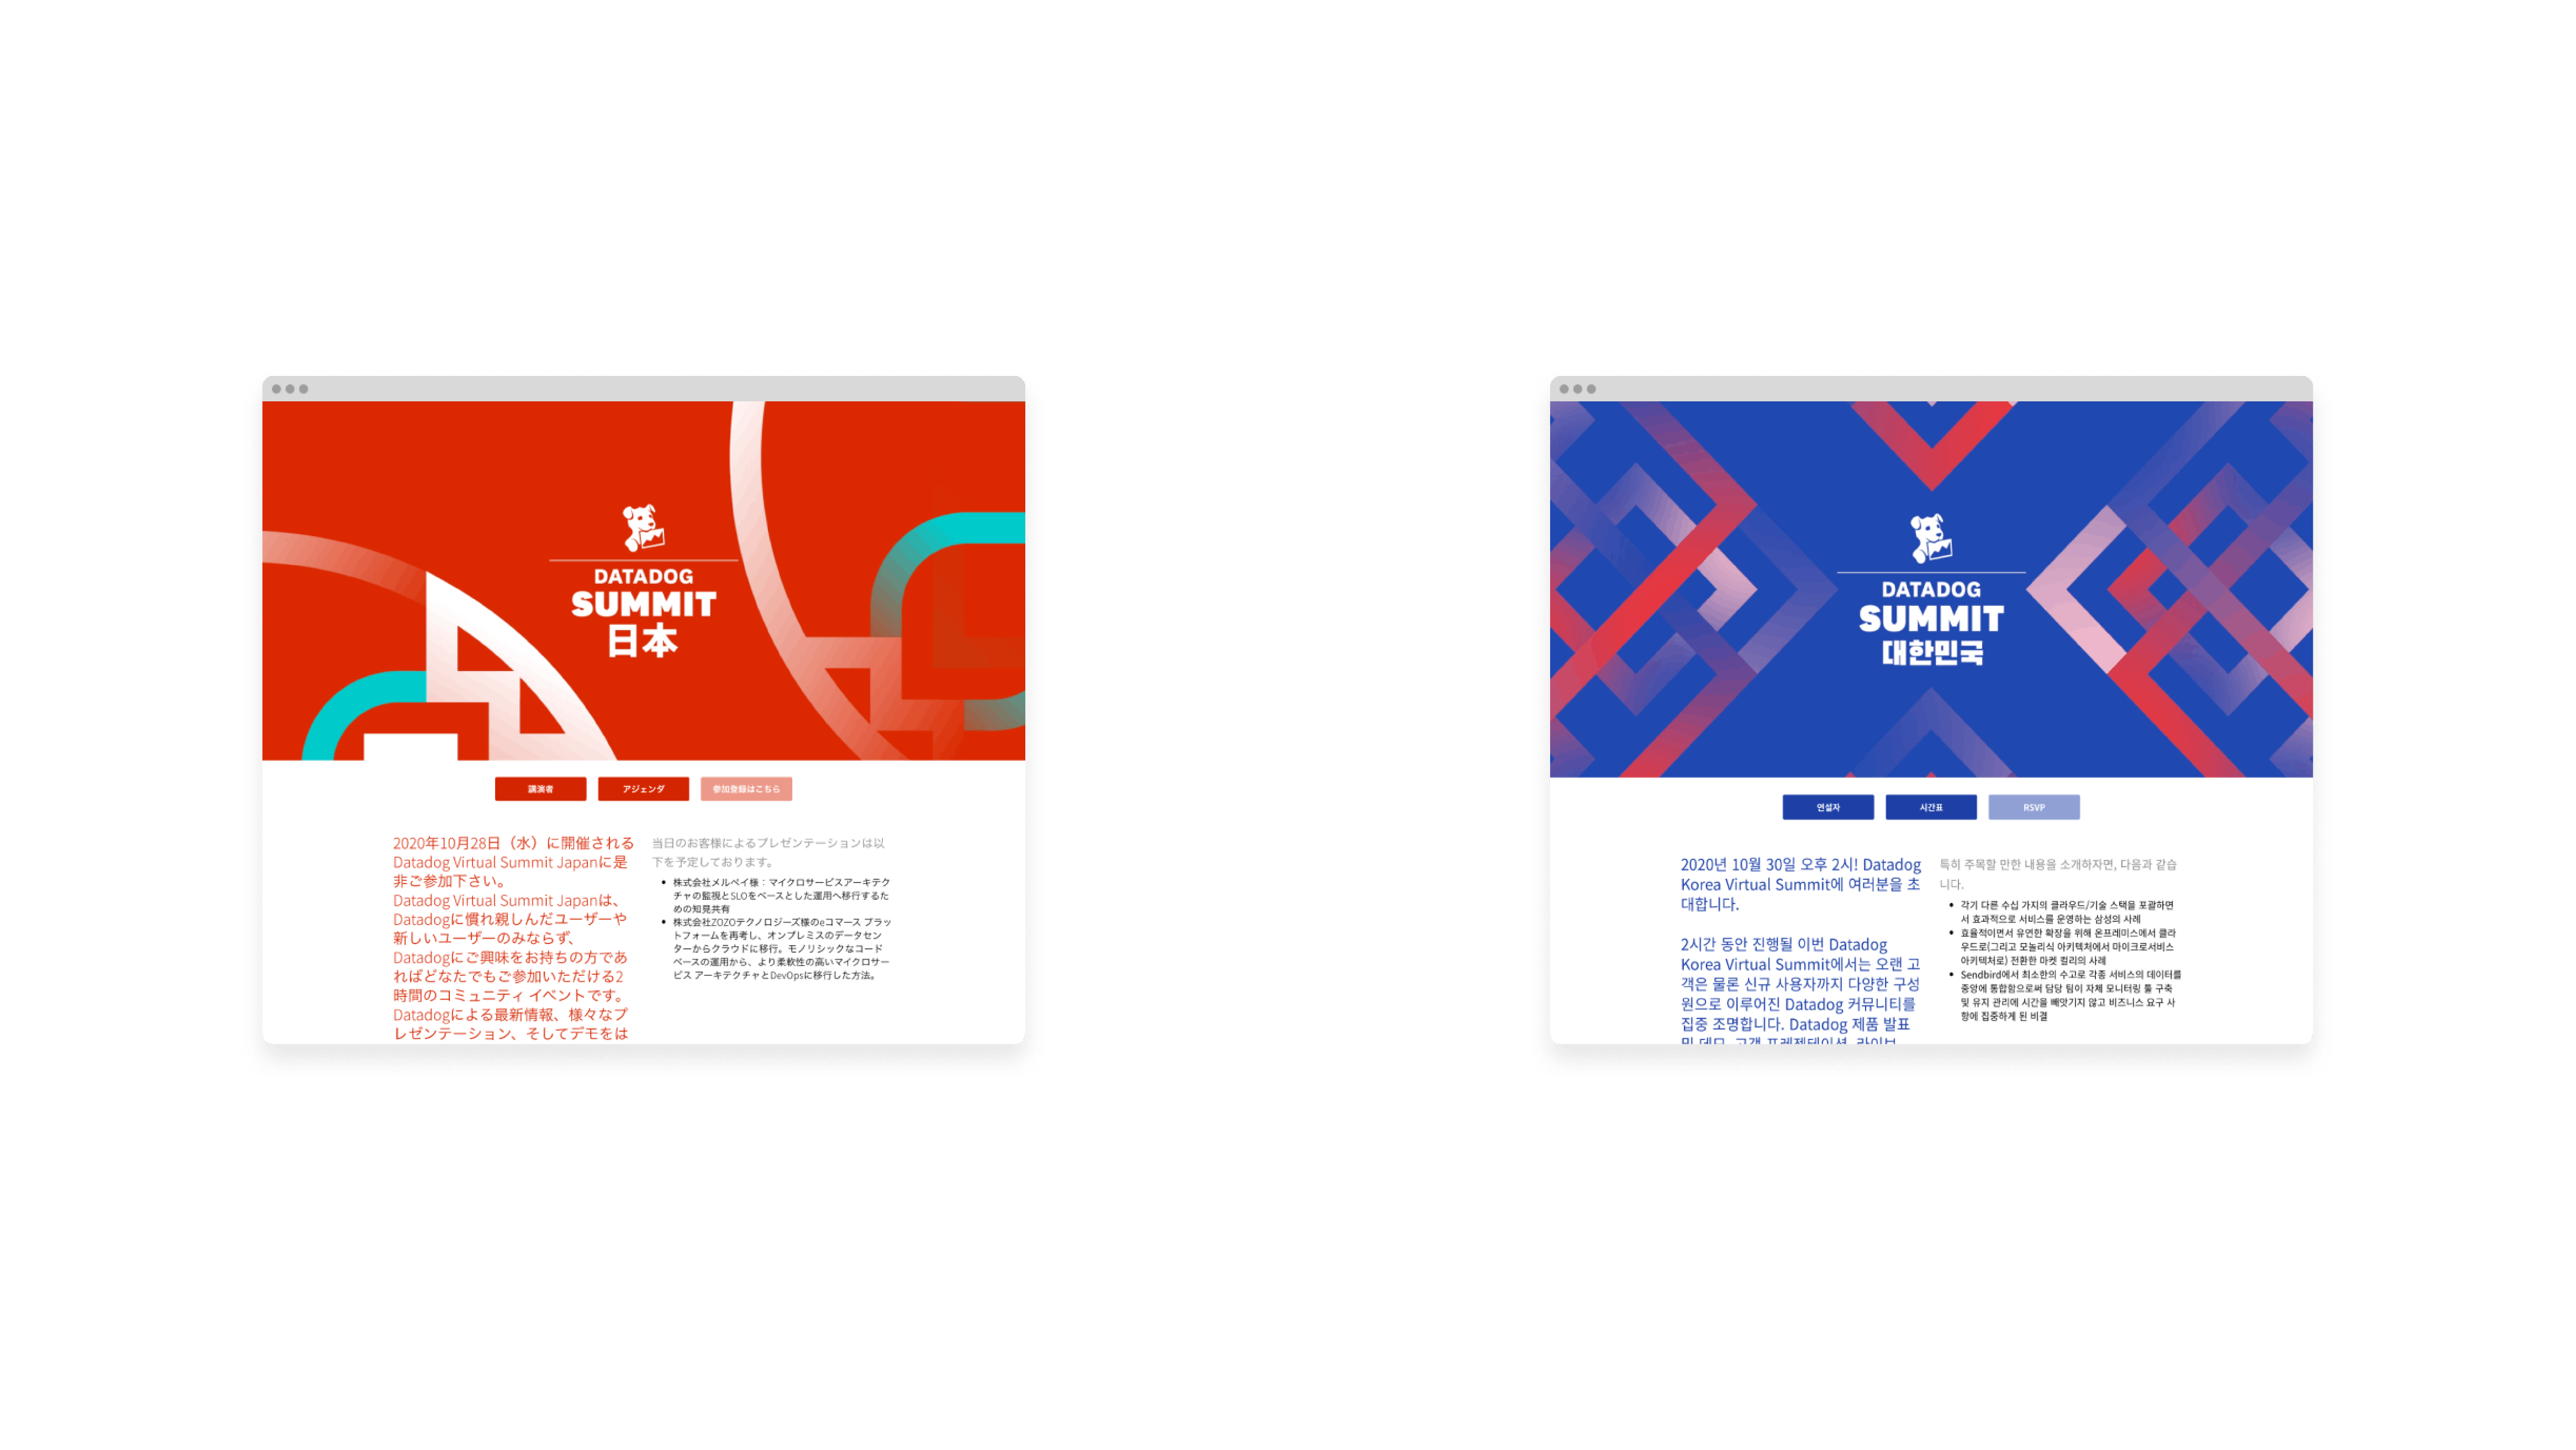 Two screencaptures of the Datadog Summit landing pages placed on a light gray background, with the landing page for Japan on the left and the landing page for South Korea on the right. Both landing pages utilize the location specific color patterns and oversized emblems to create a background for the header section and display additional, event specific information in red(Japan), blue(South Korea), and black copy on a white background.